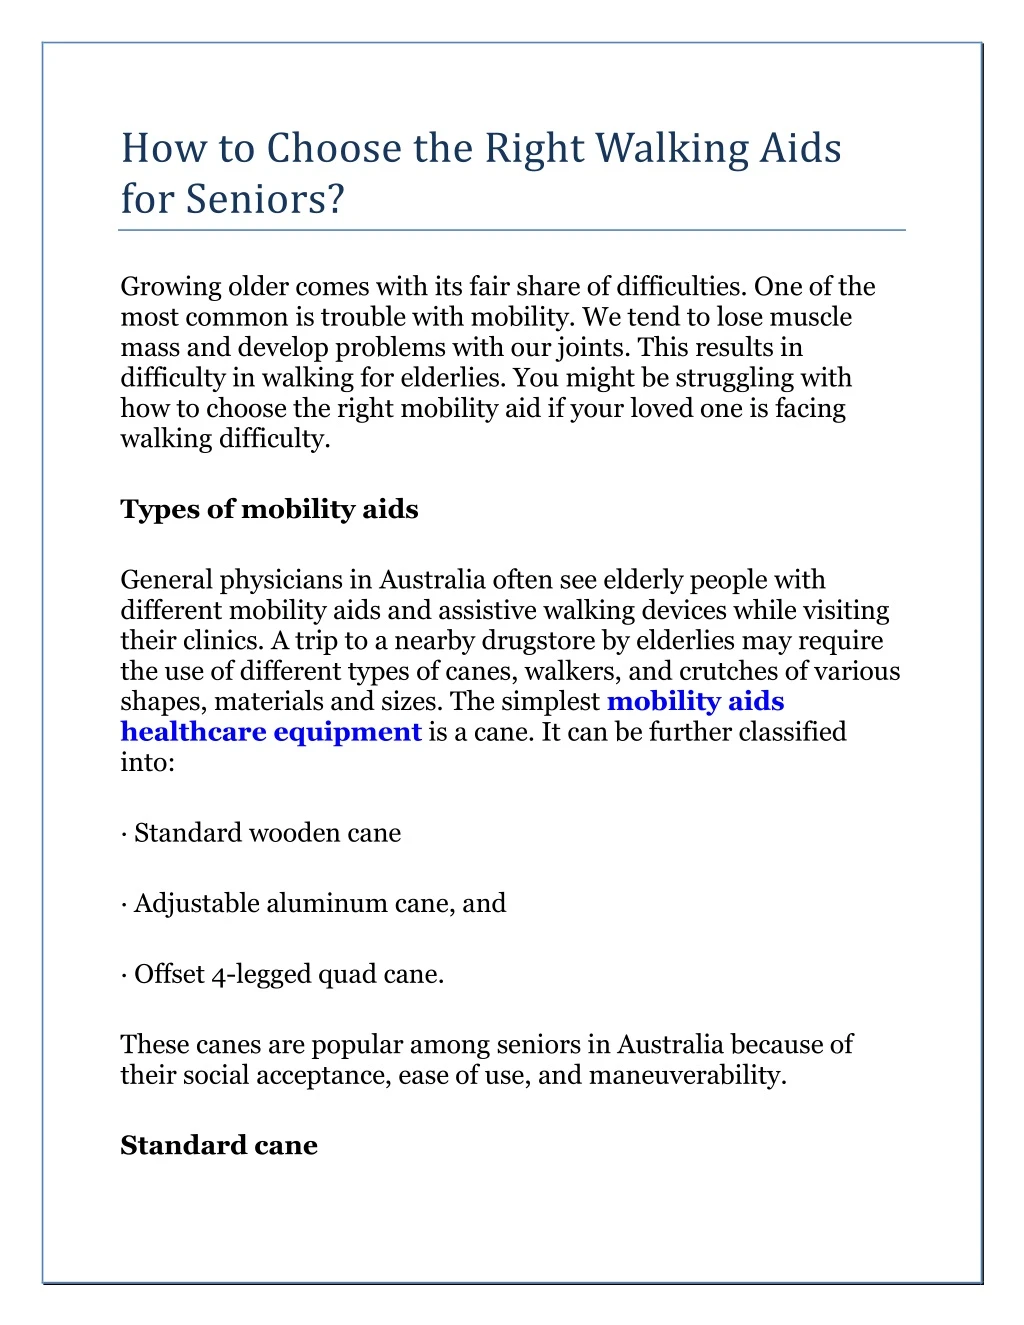 how to choose the right walking aids for seniors